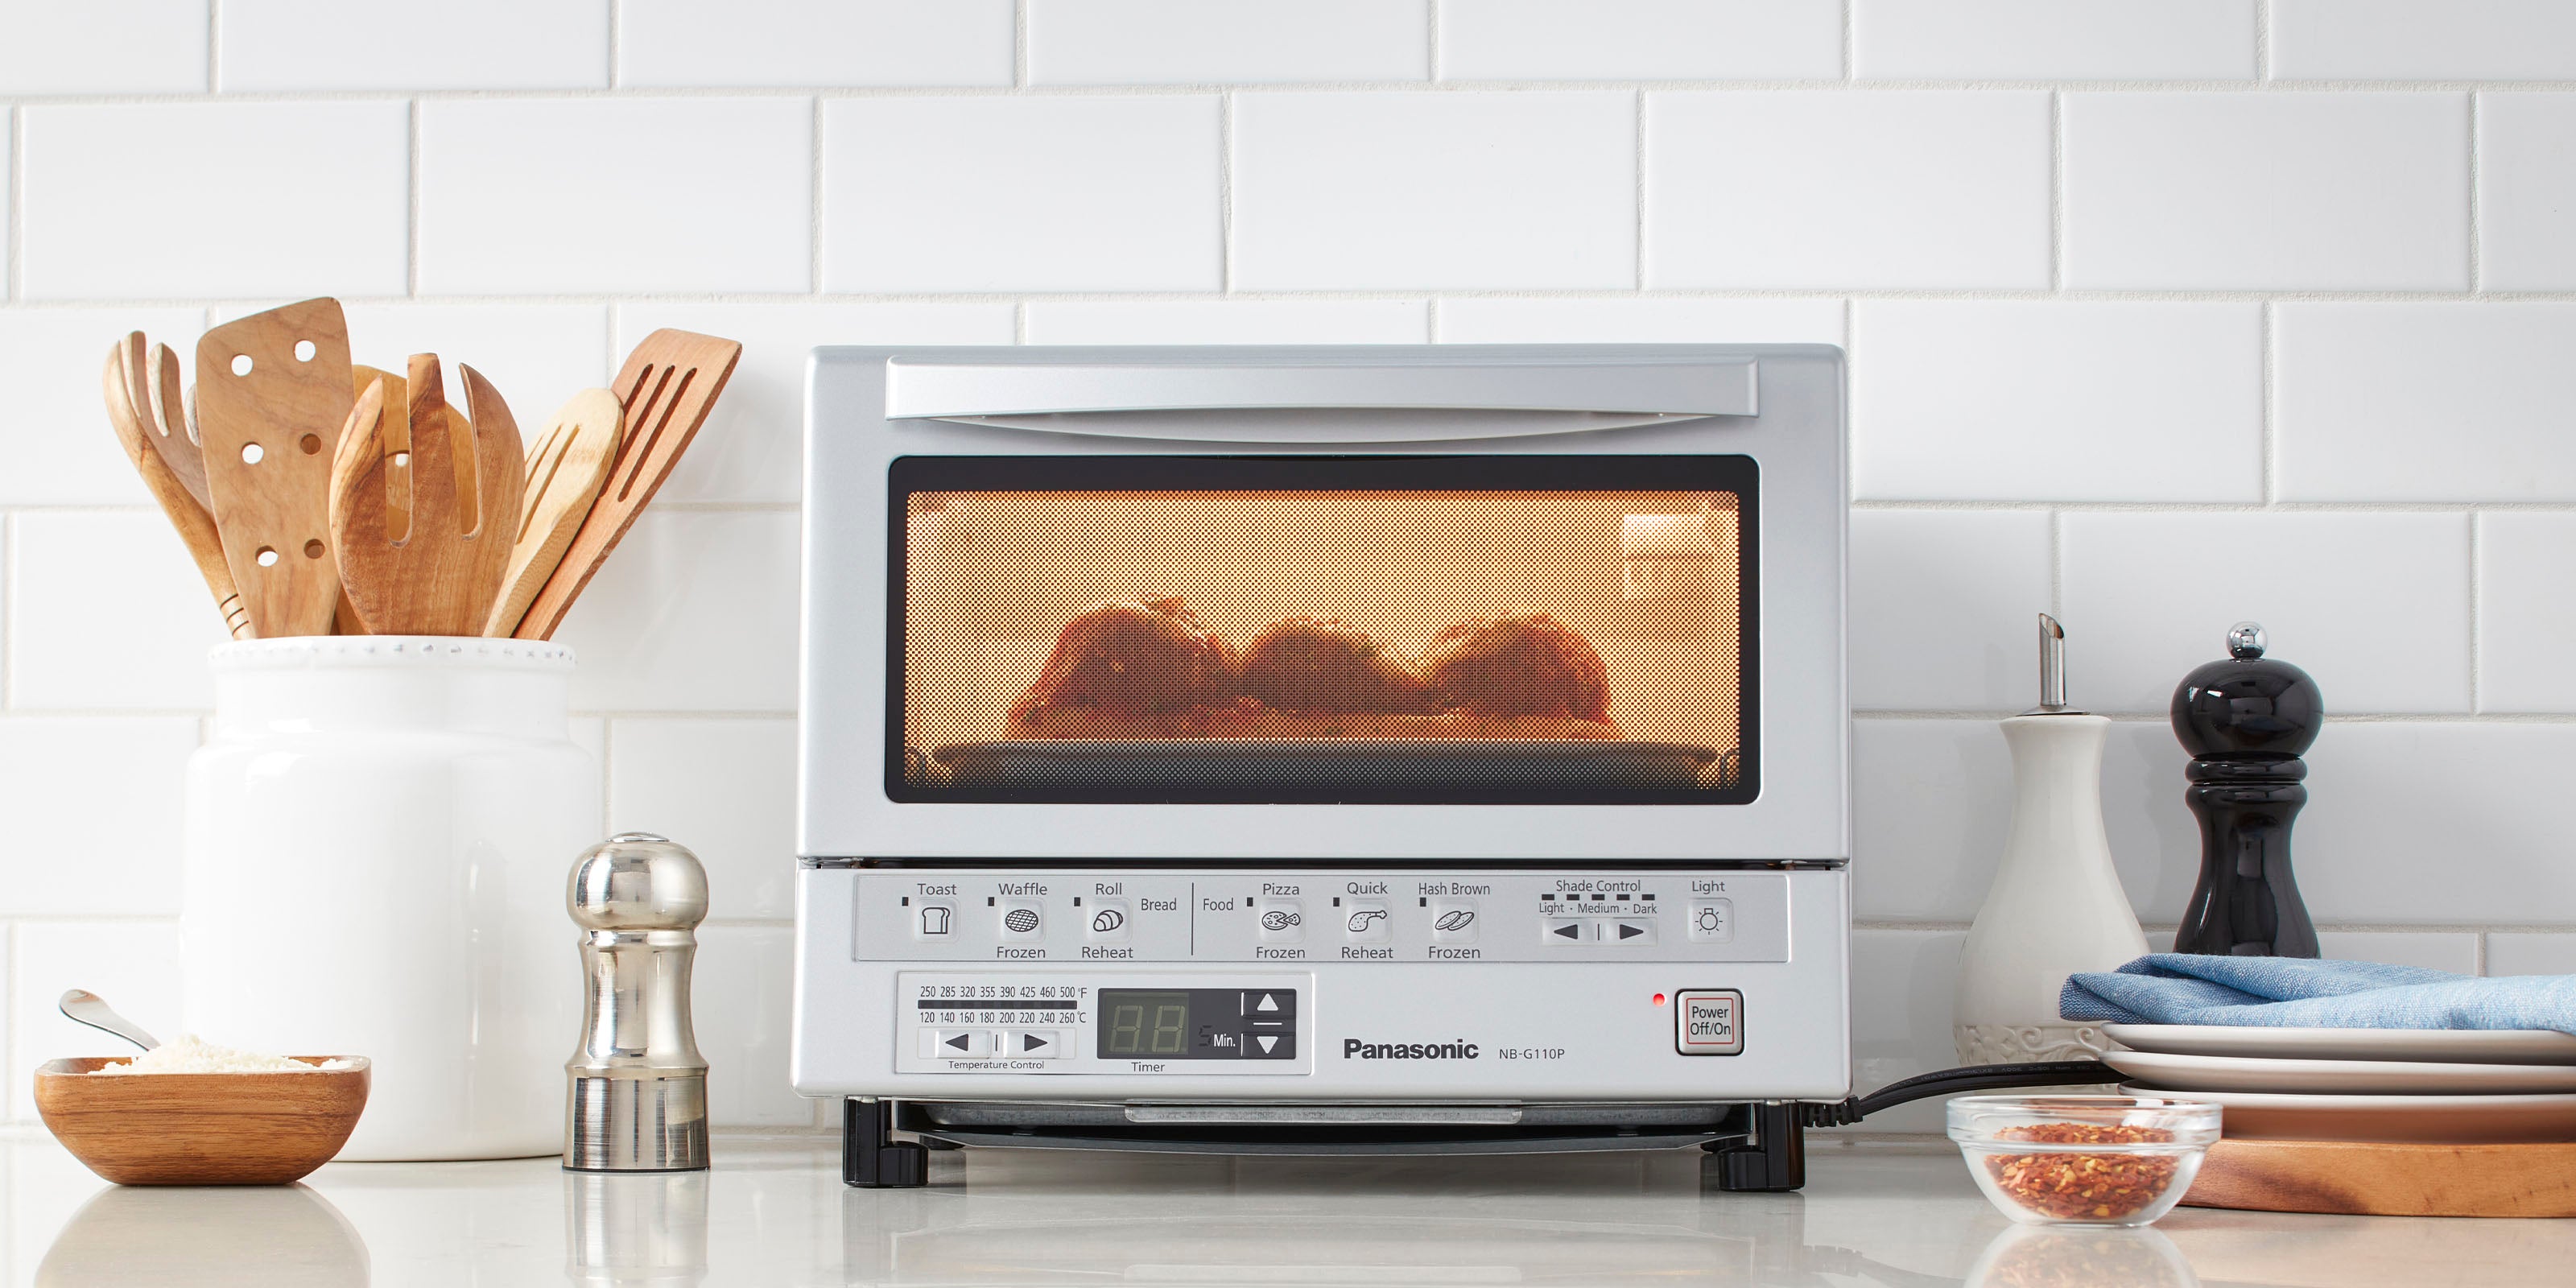 De'Longhi Small Convection Toaster Oven For Countertop With internal light  And 9 Preset Functions & Reviews